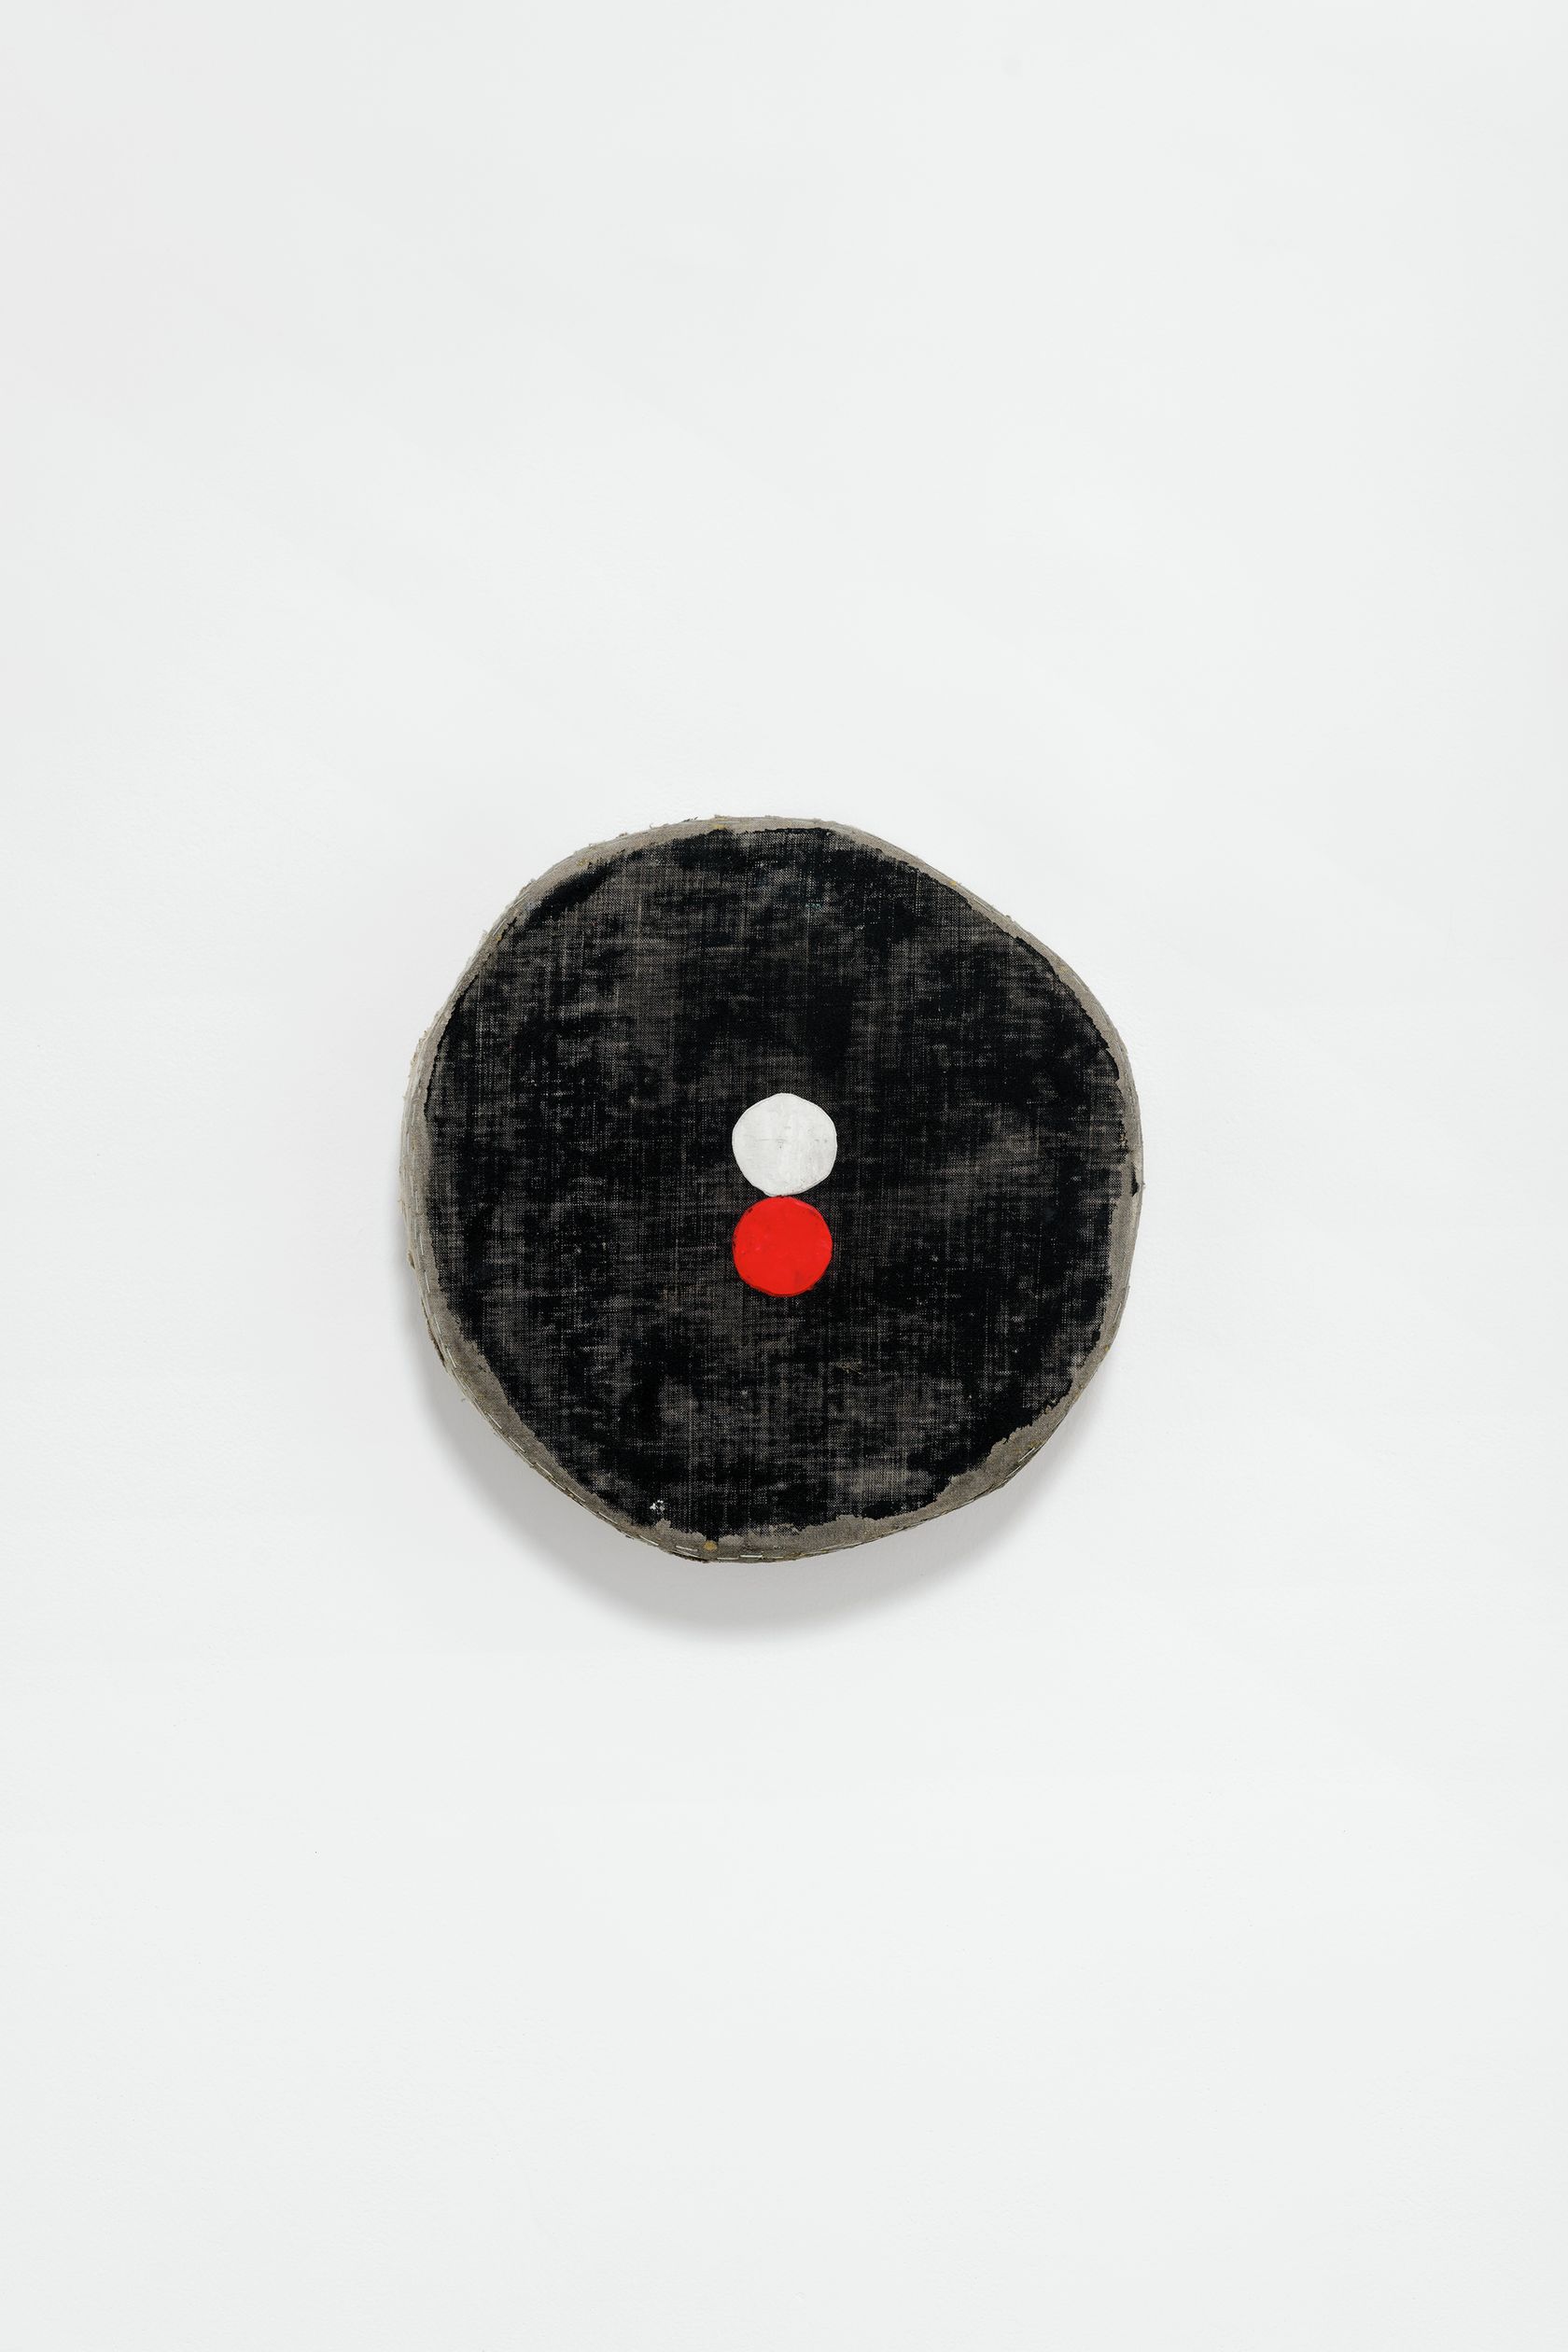 Black Circle with Stacked White and Red Circle